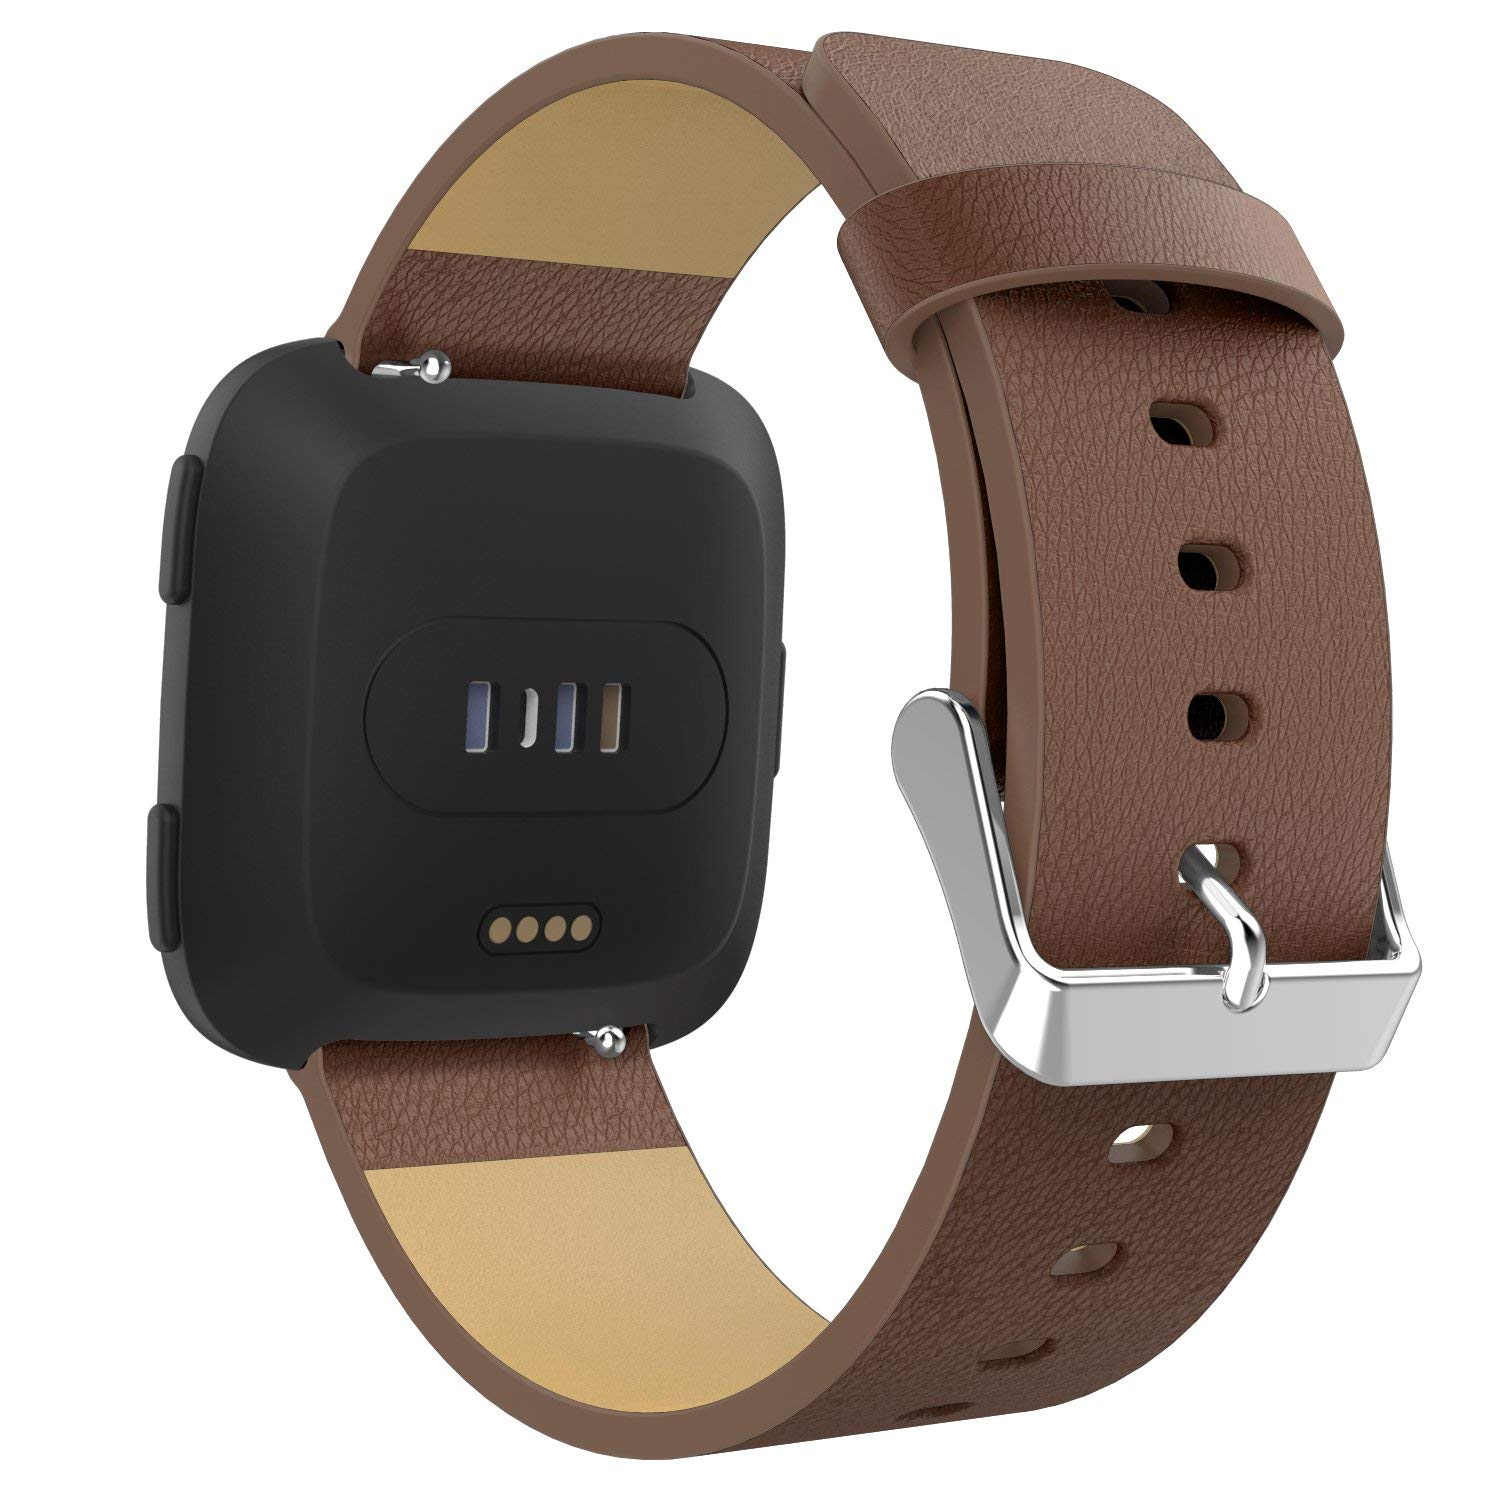 Best Leather Bands for Fitbit Versa | iMore